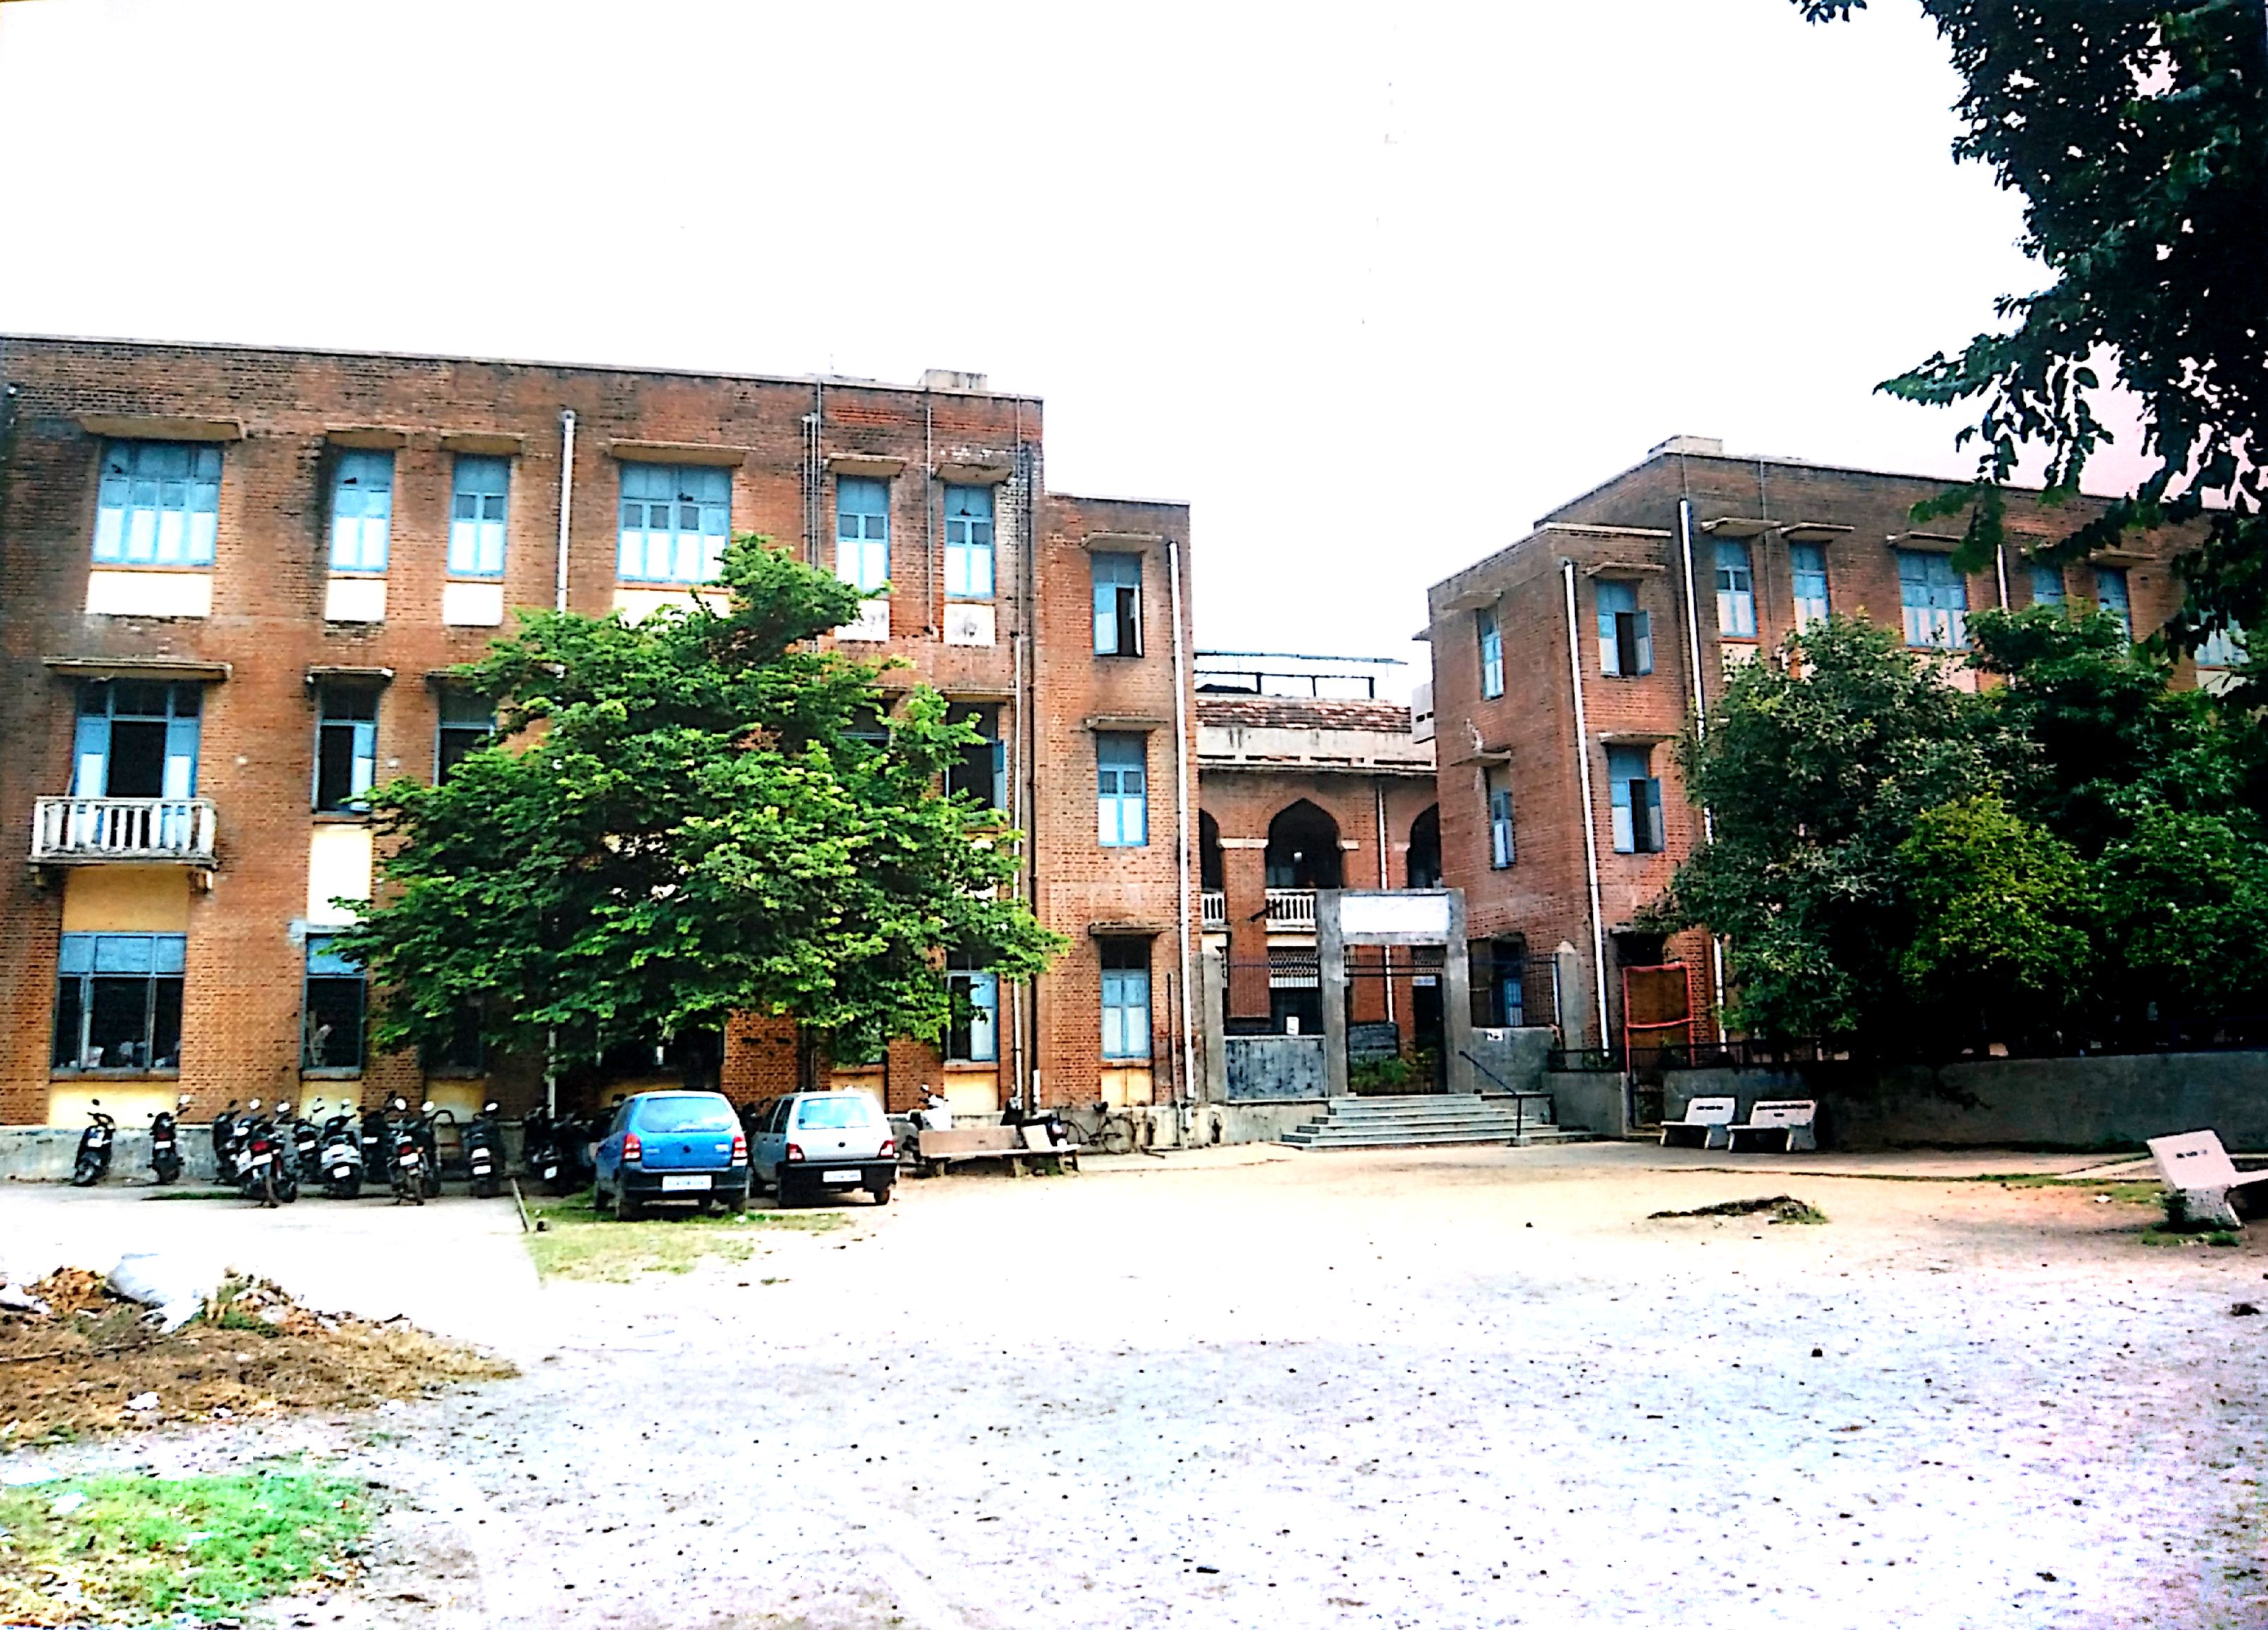 MAHRANI HIGH SCHOOL FOR GIRLS|Colleges|Education